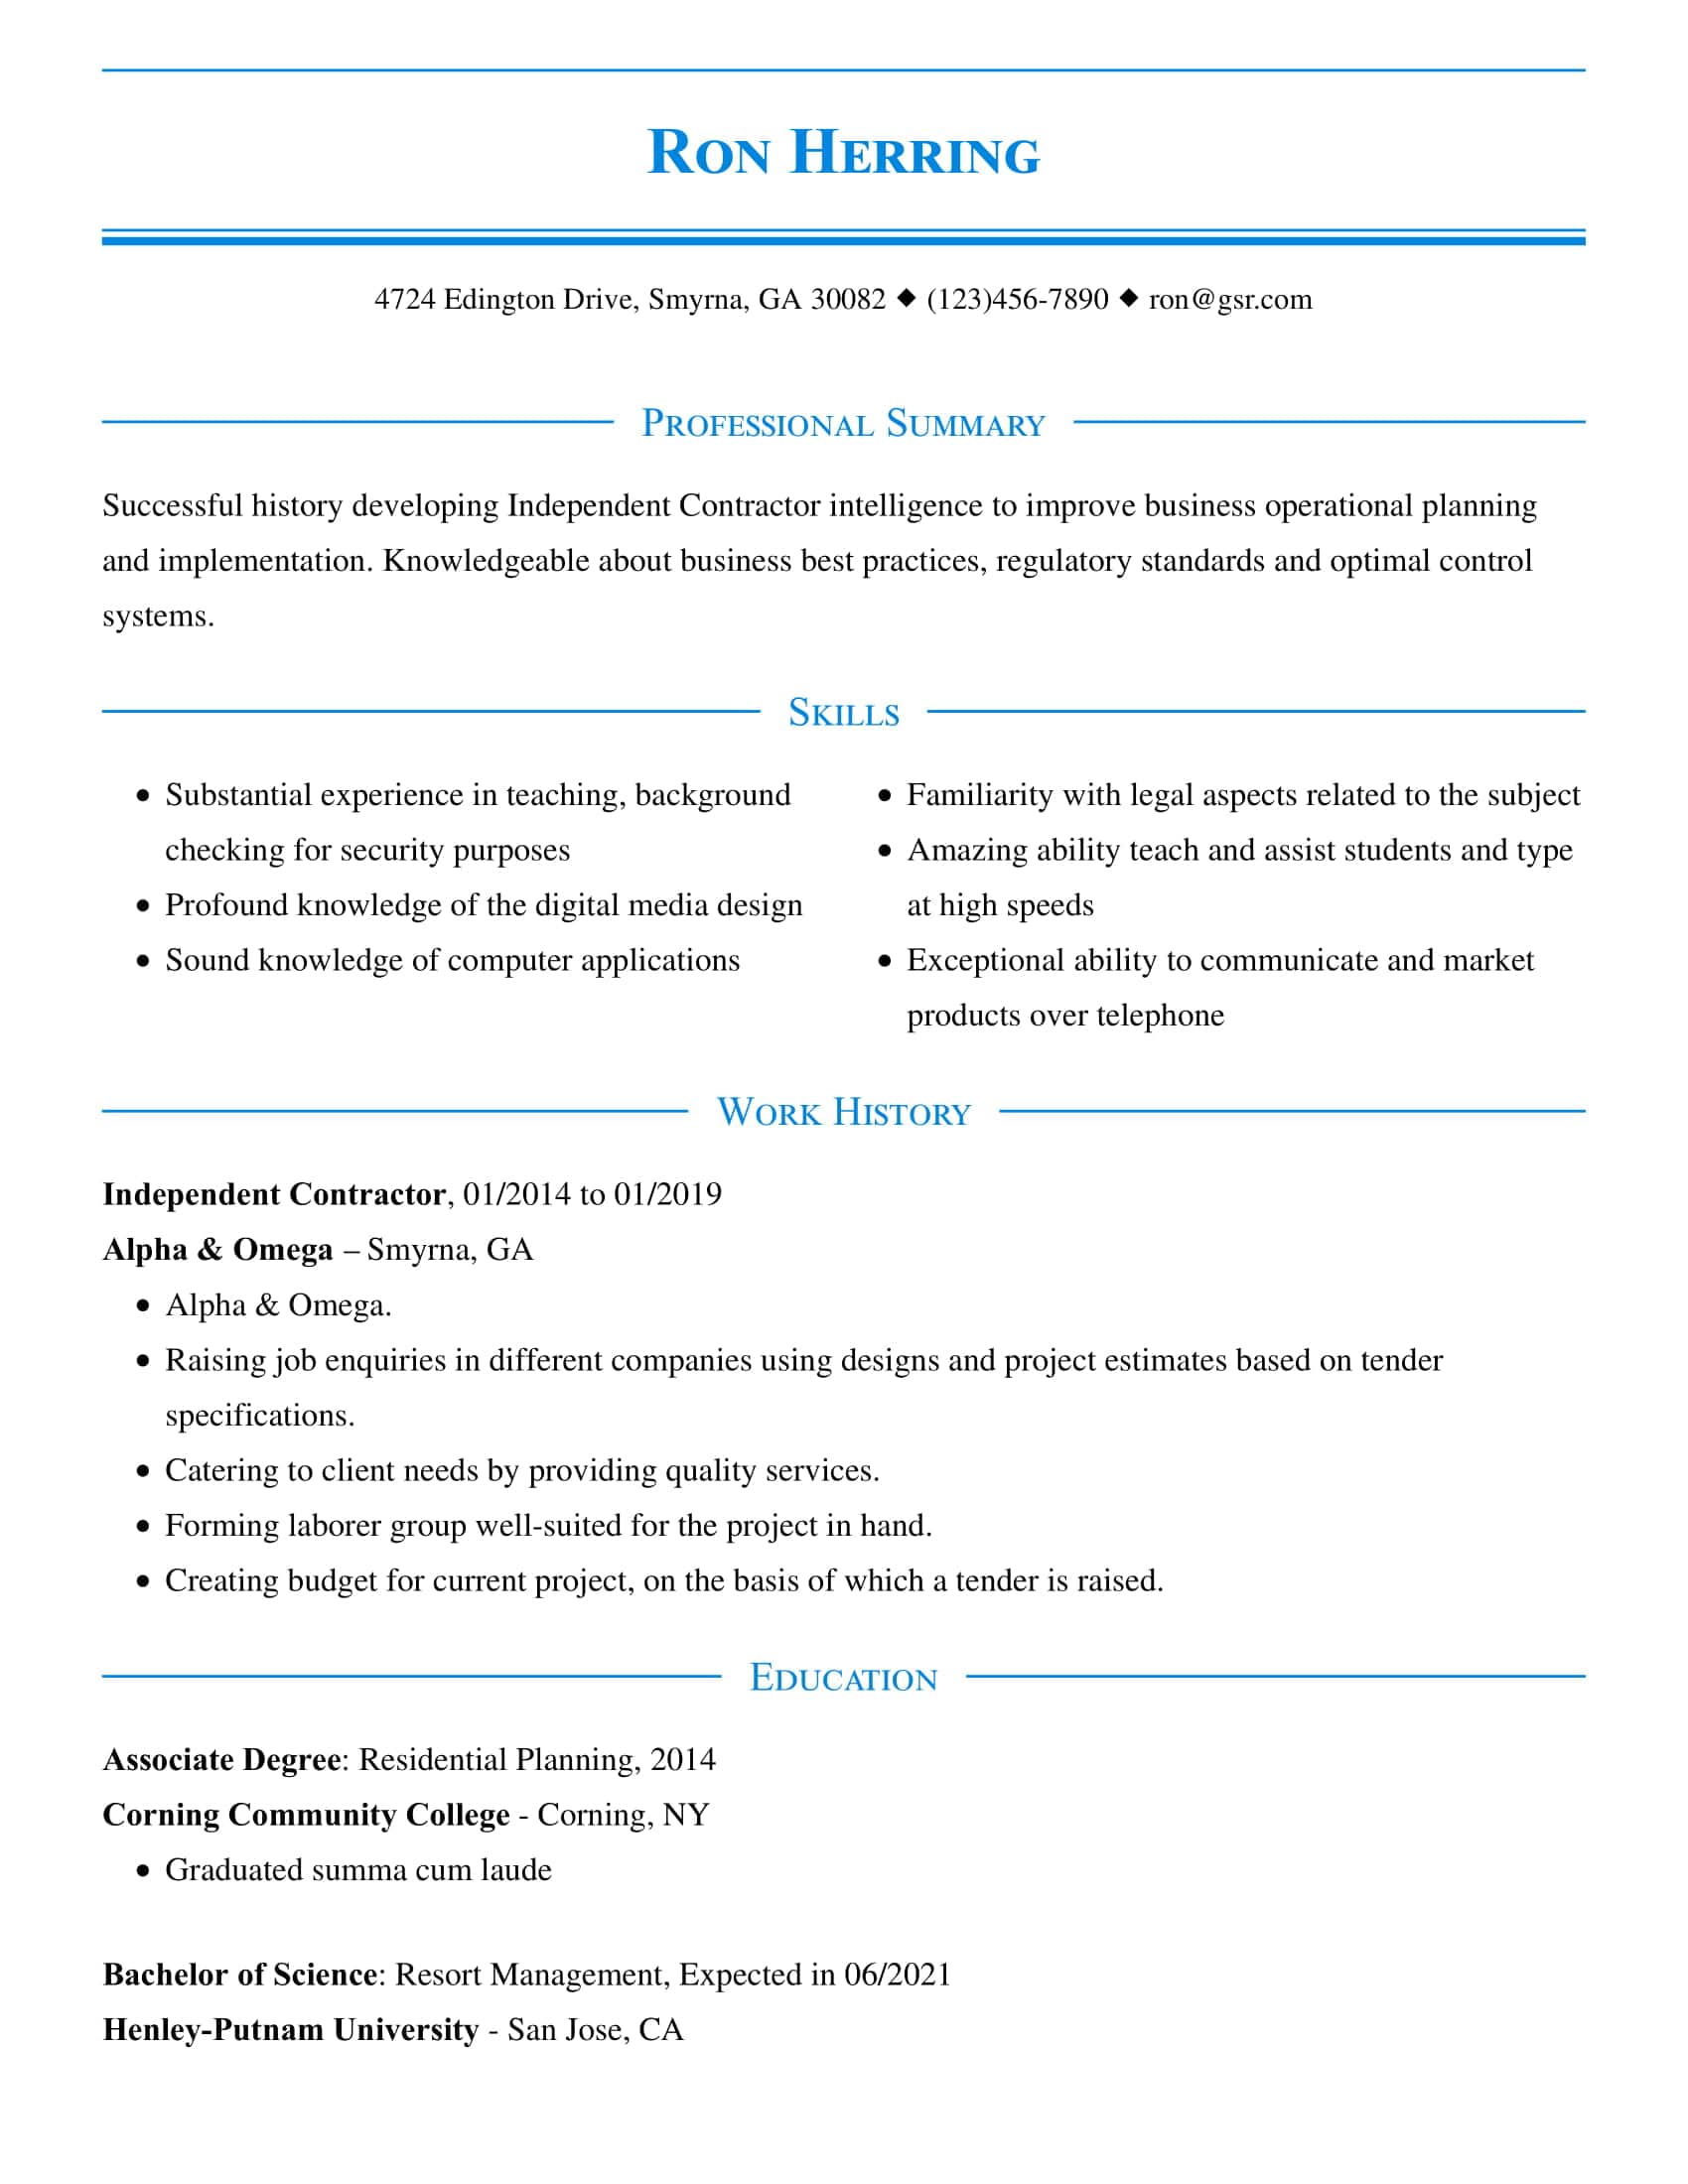 Professional Refined Blue Resume Template